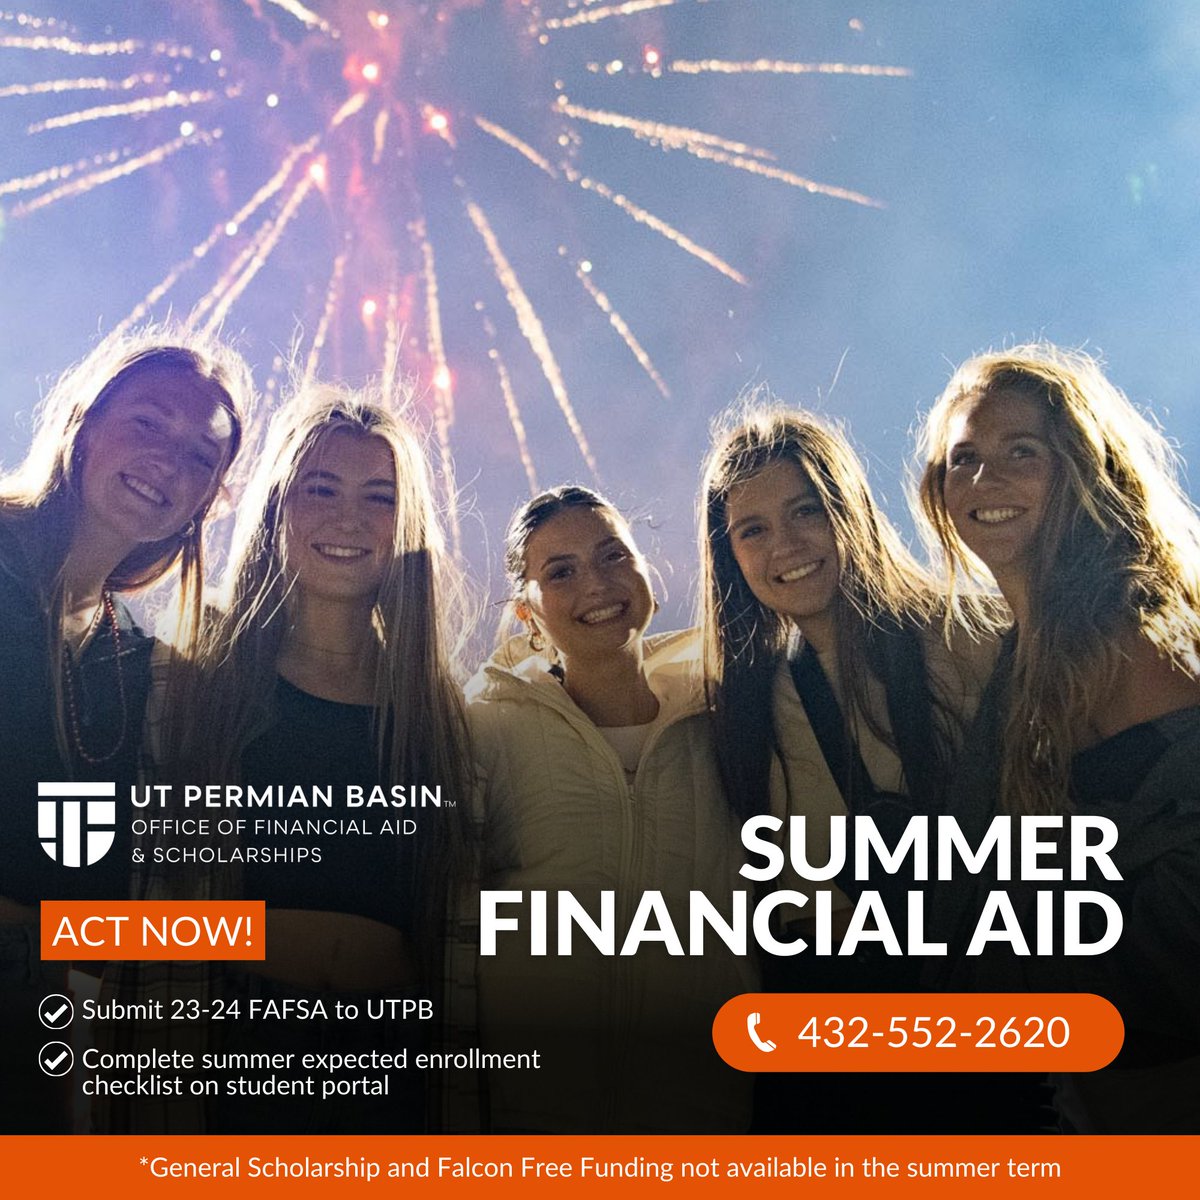 First 7 week summer classes begin May 13th. It is not too late to apply for summer financial aid. If you are planning to attend, make sure you complete the steps found in this post. #utpb #falconsup